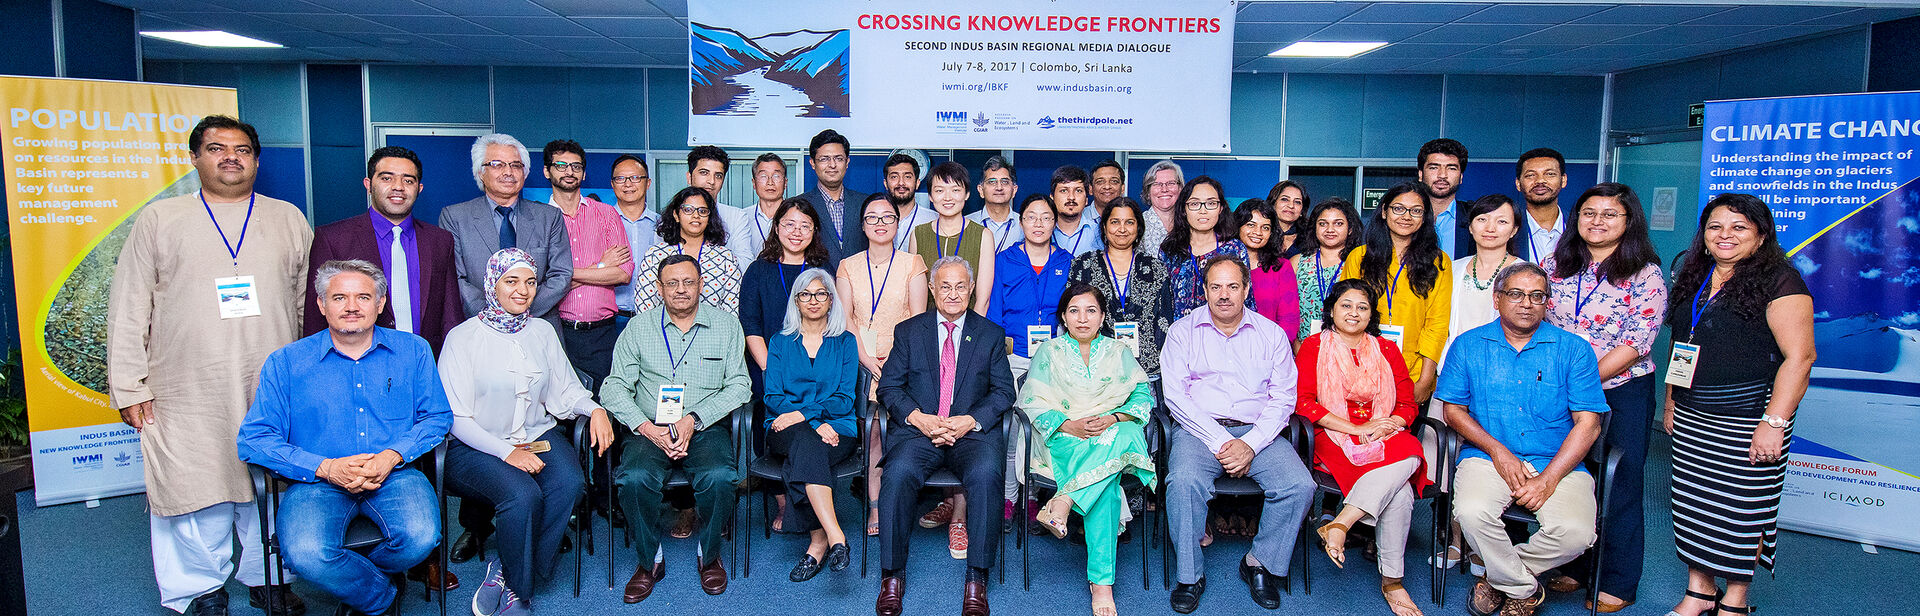 Crossing knowledge frontiers – Second Indus Basin Regional Media Dialogue 